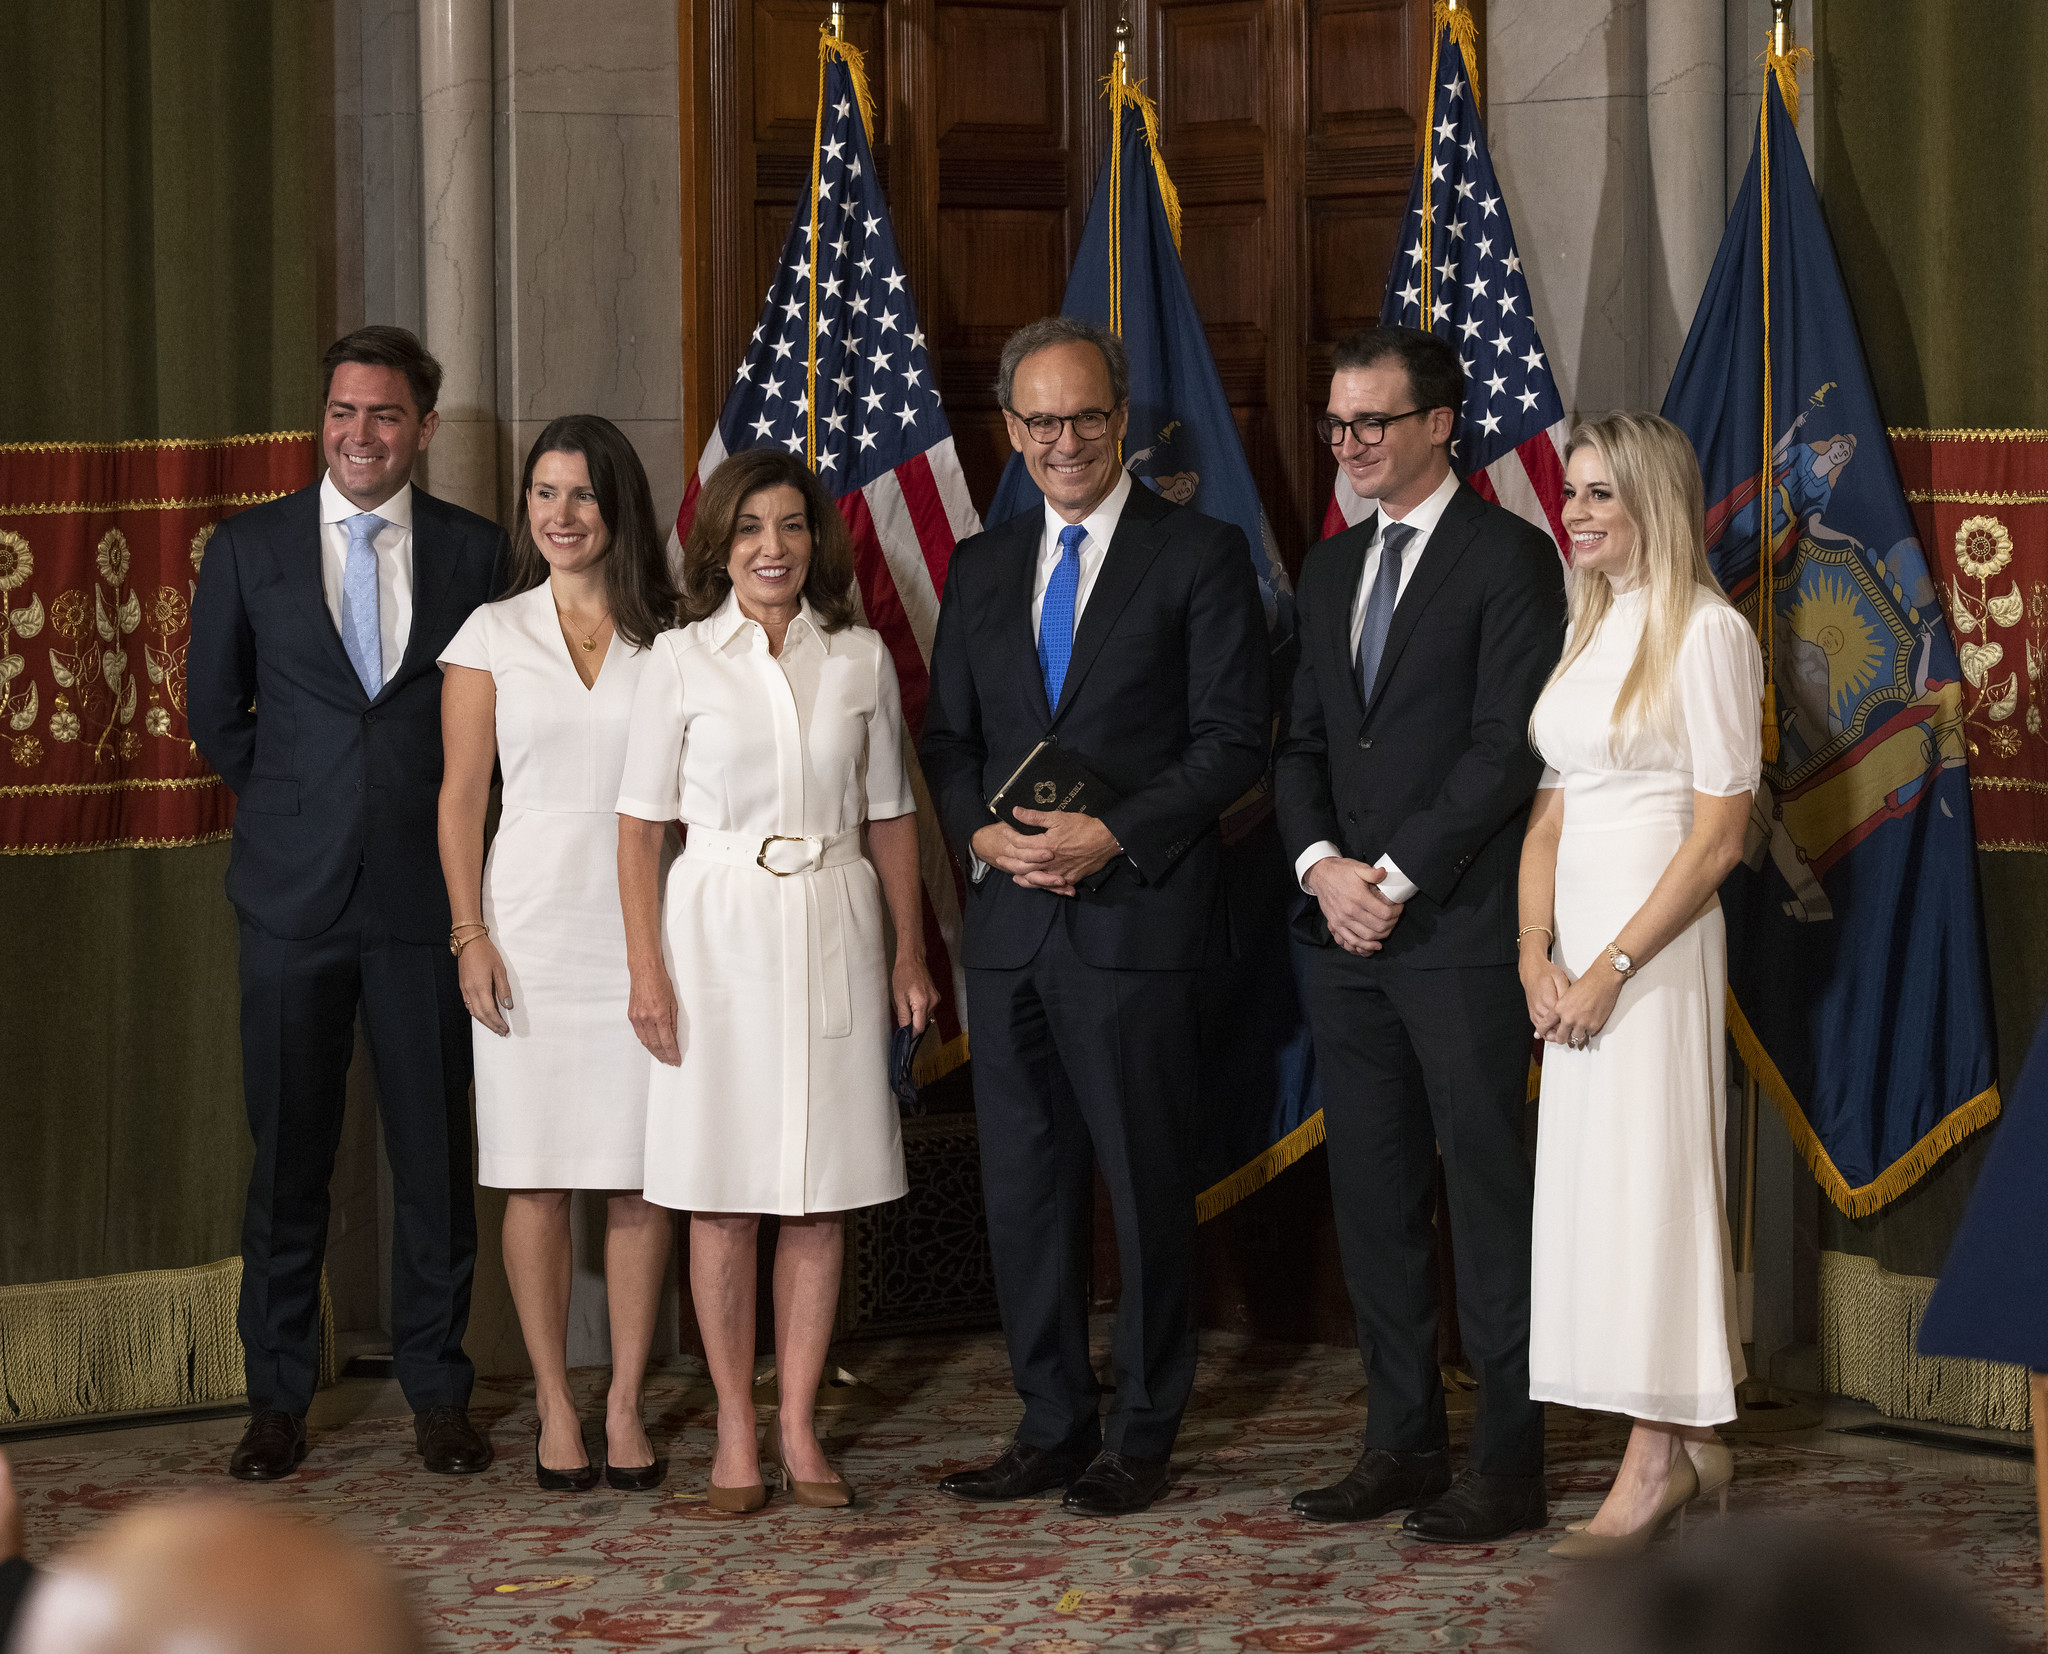 Governor Hochul in a white dress with her family—her daughter and daughter-in-law are wearing white dresses too